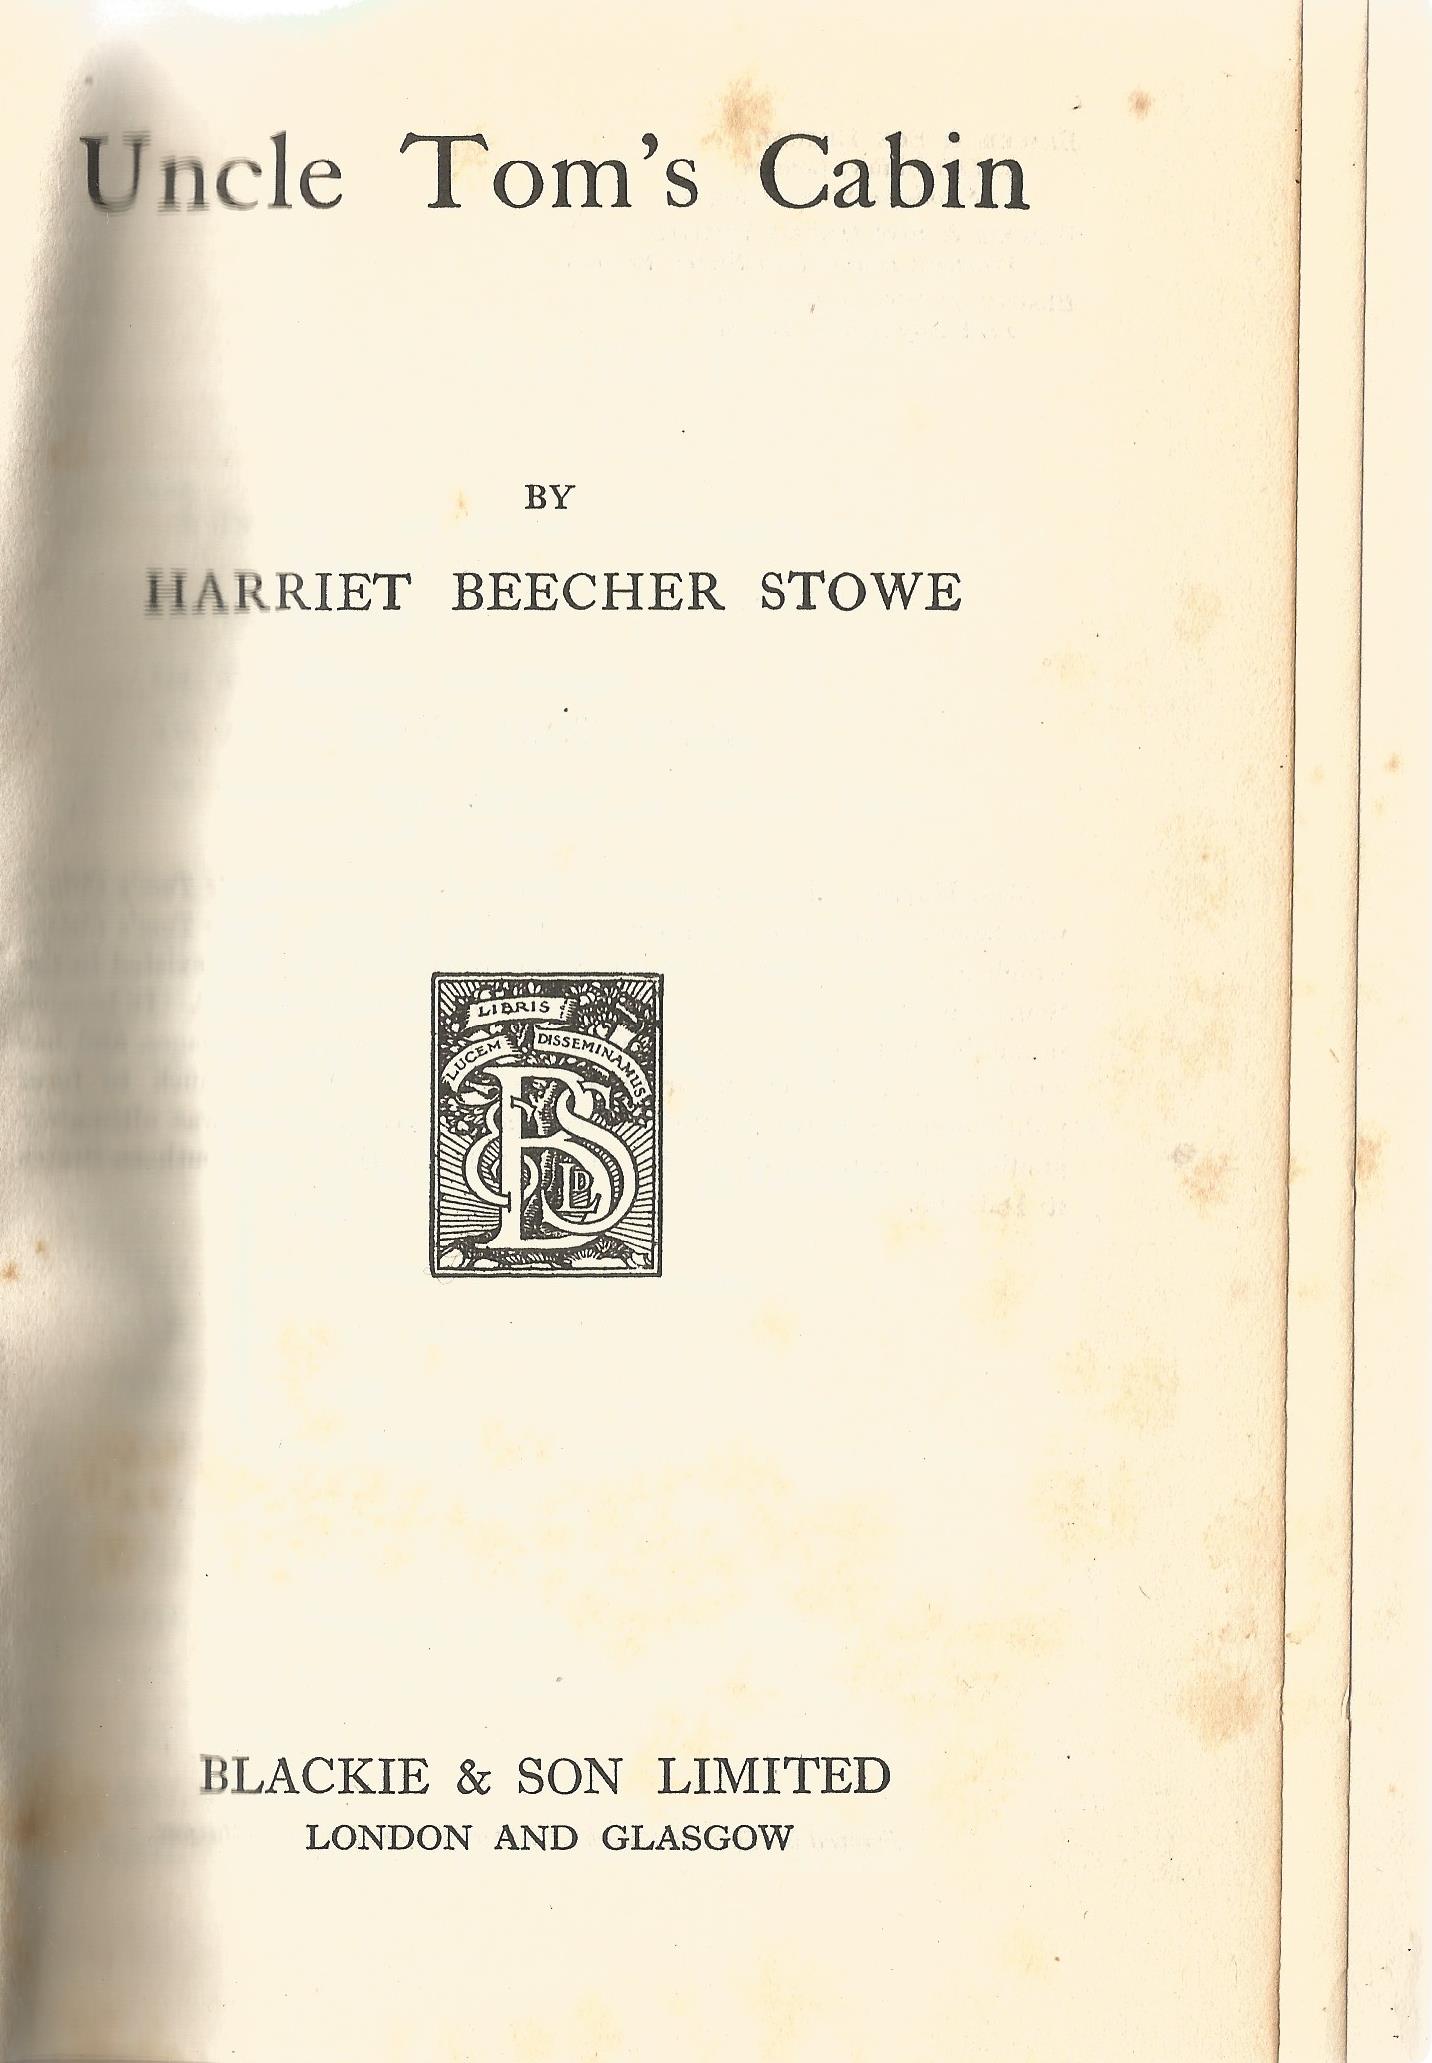 Harriet Beecher Stowe hardback book Uncle Tom's Cabin published by Blackie & Son Ltd in good - Image 2 of 2